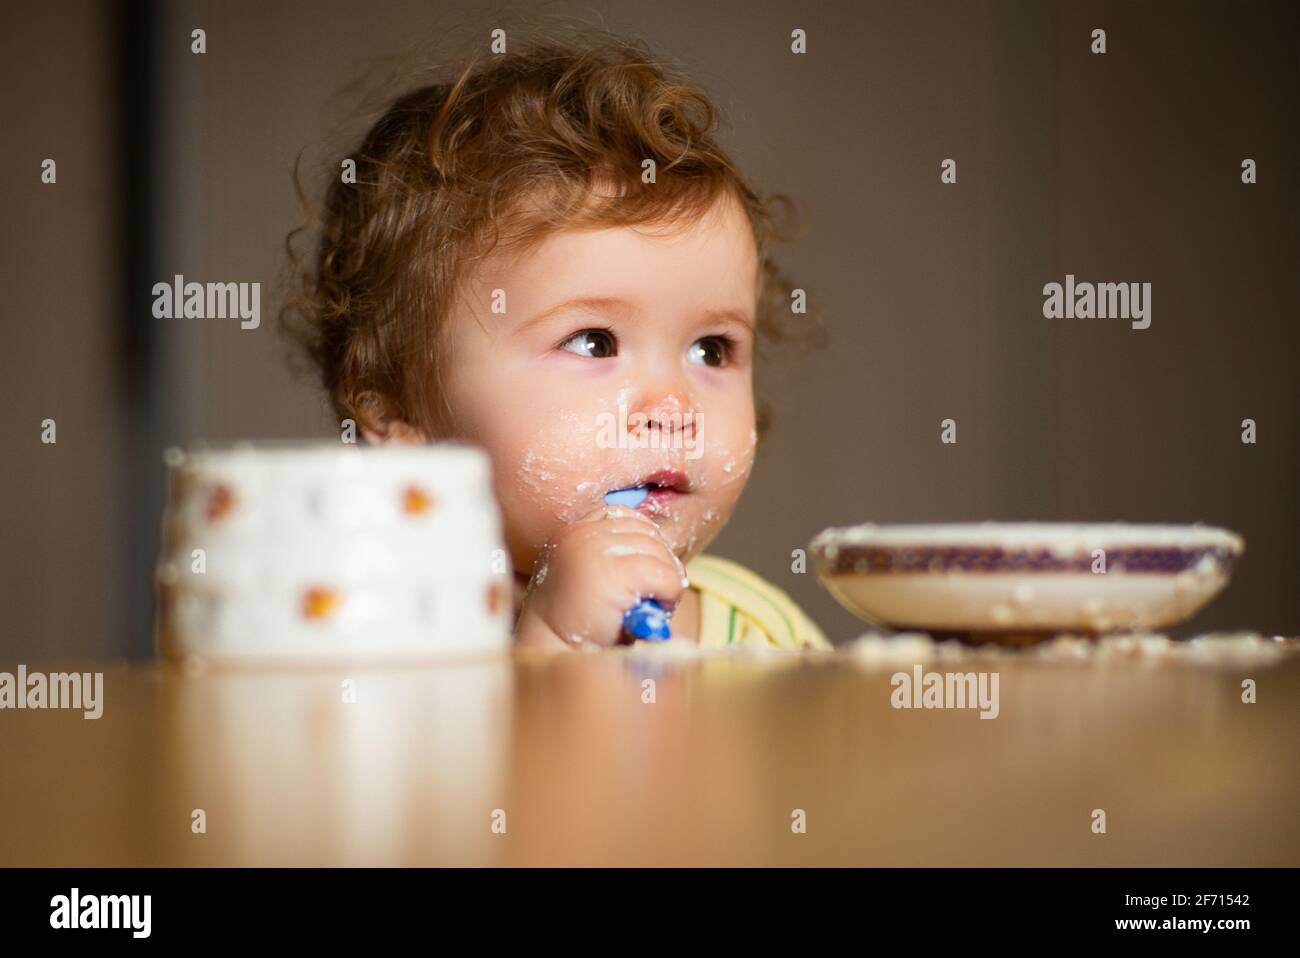 Child eating, nutrition concept. A baby eating food from a bowl. Stock Photo